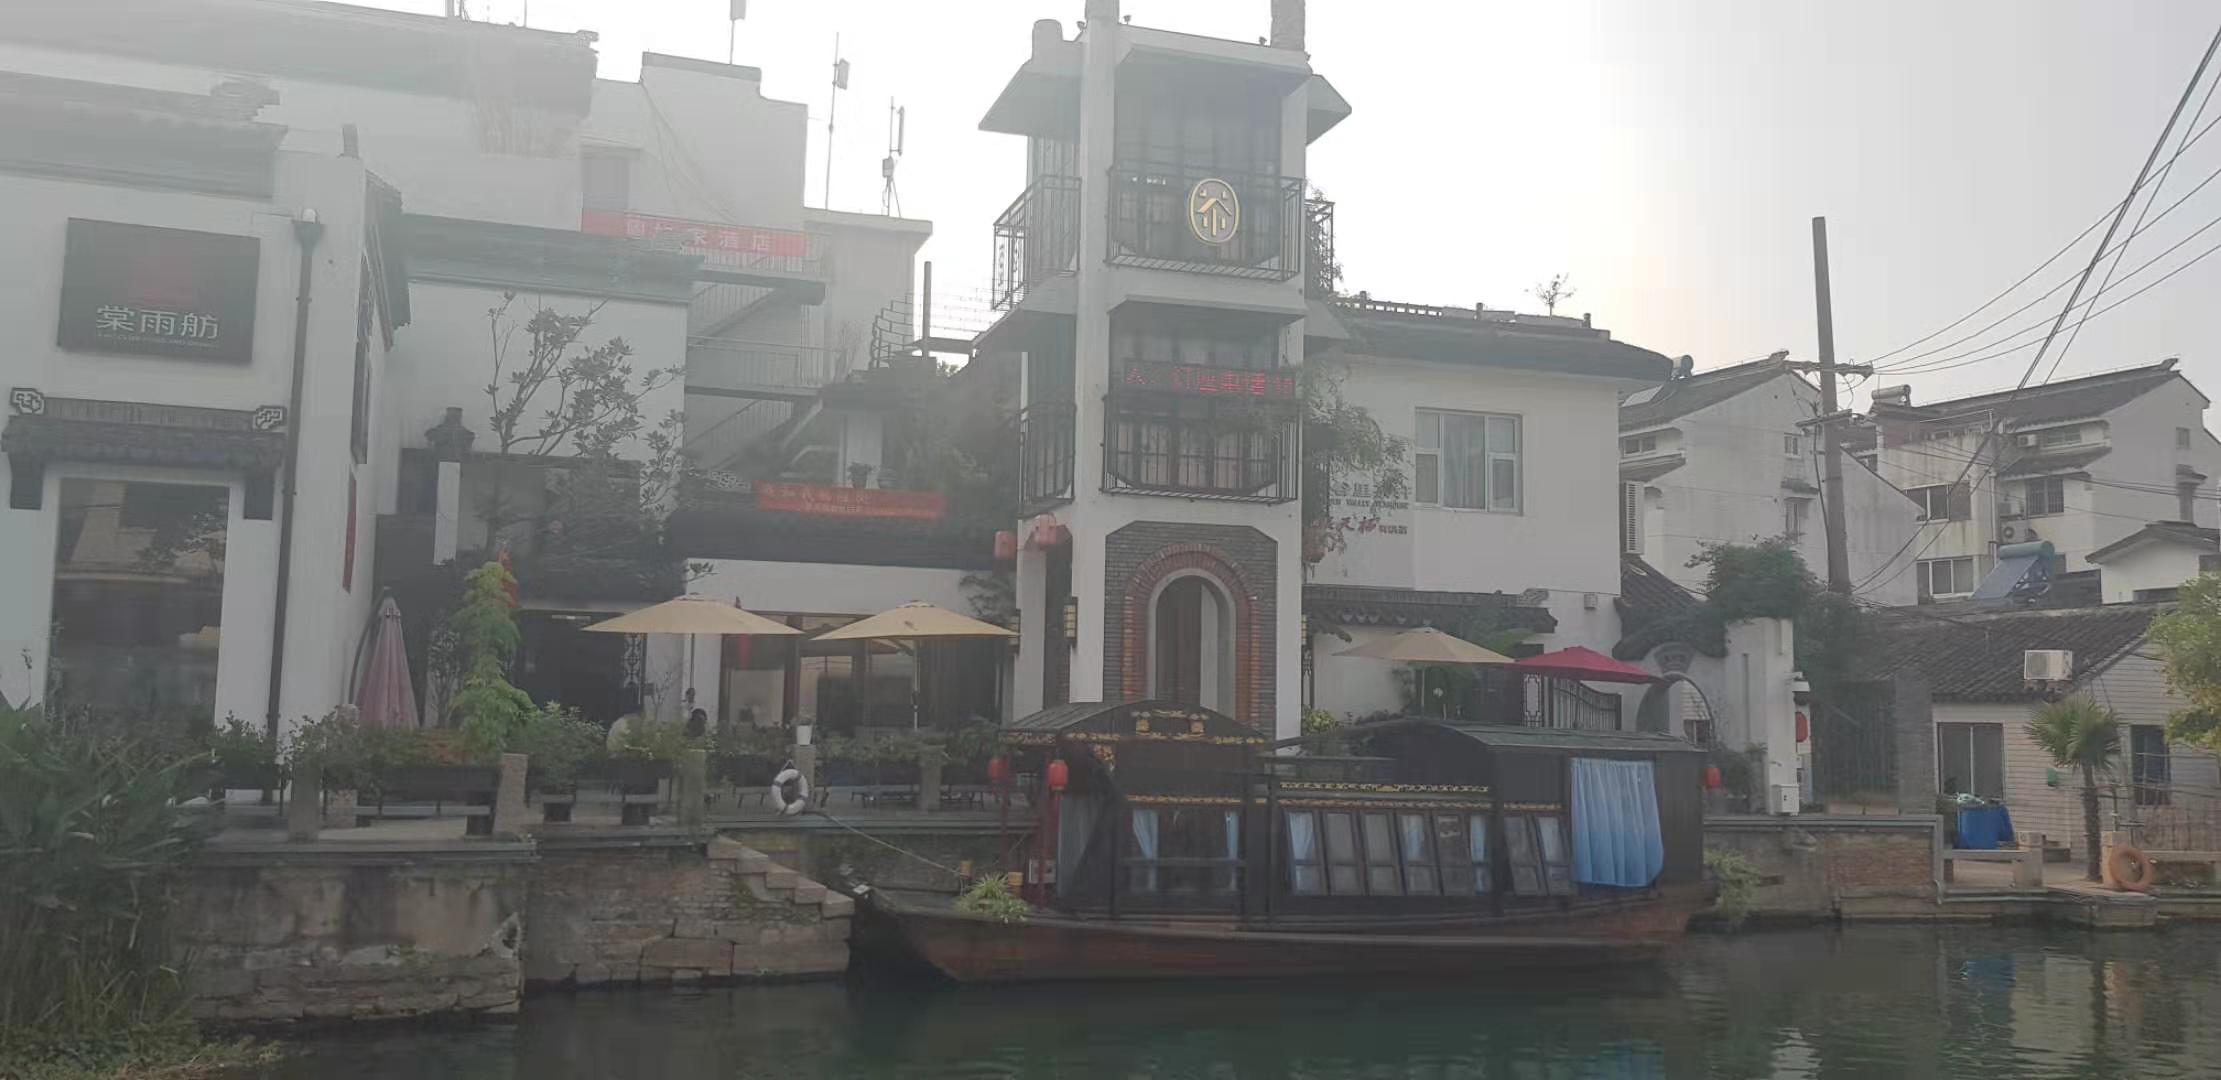 places to visit in suzhou